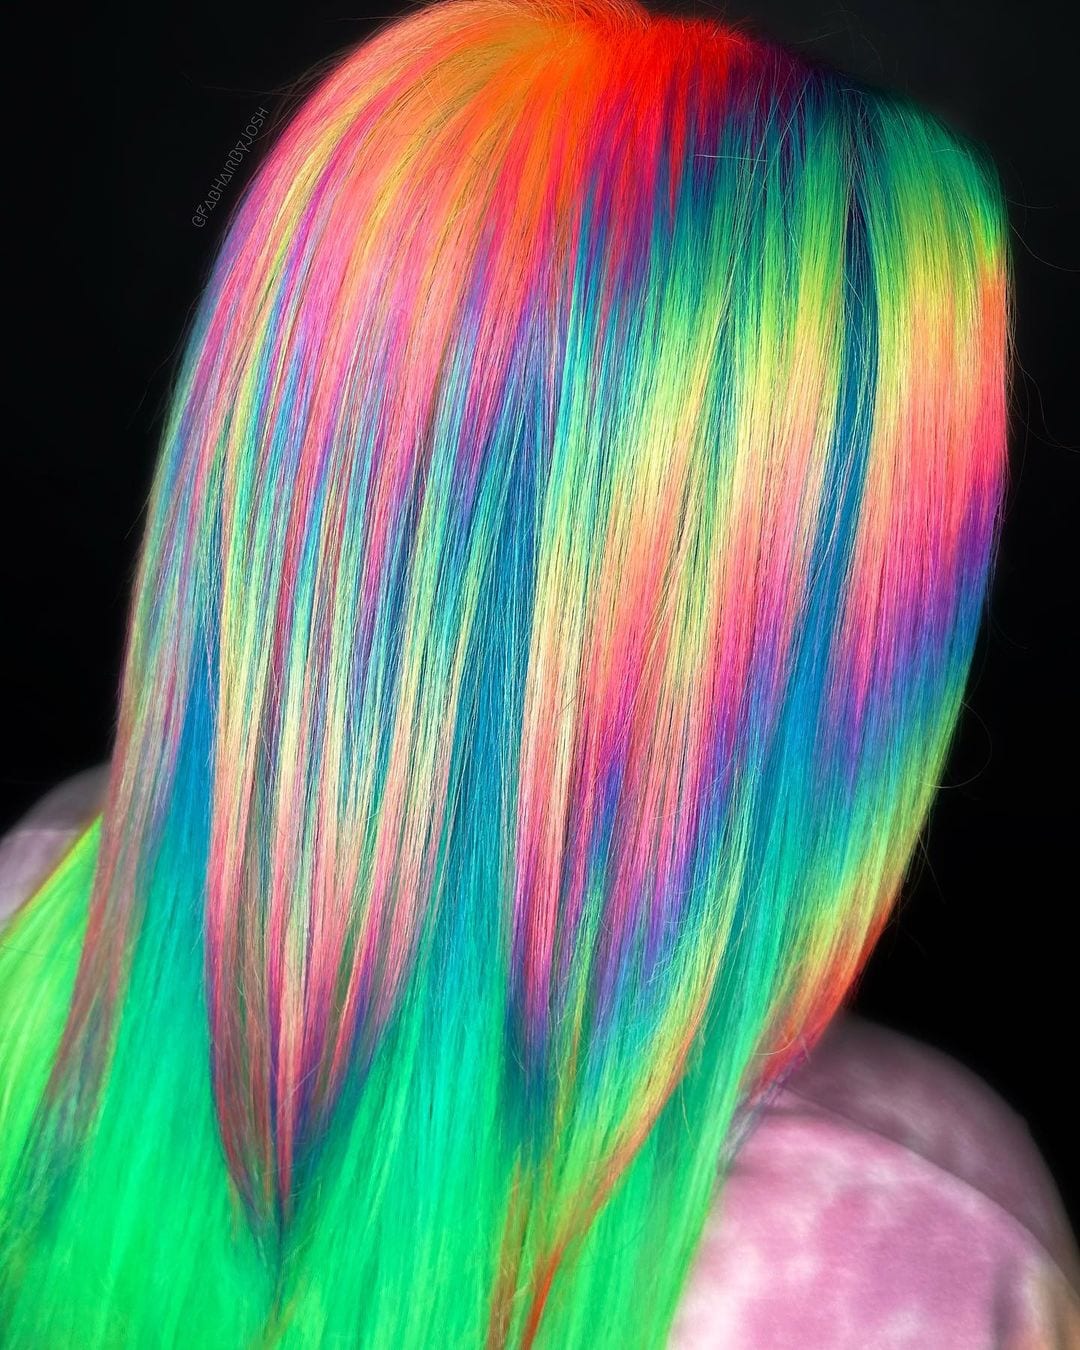 Halographic hair that looks like the Neon Aurora